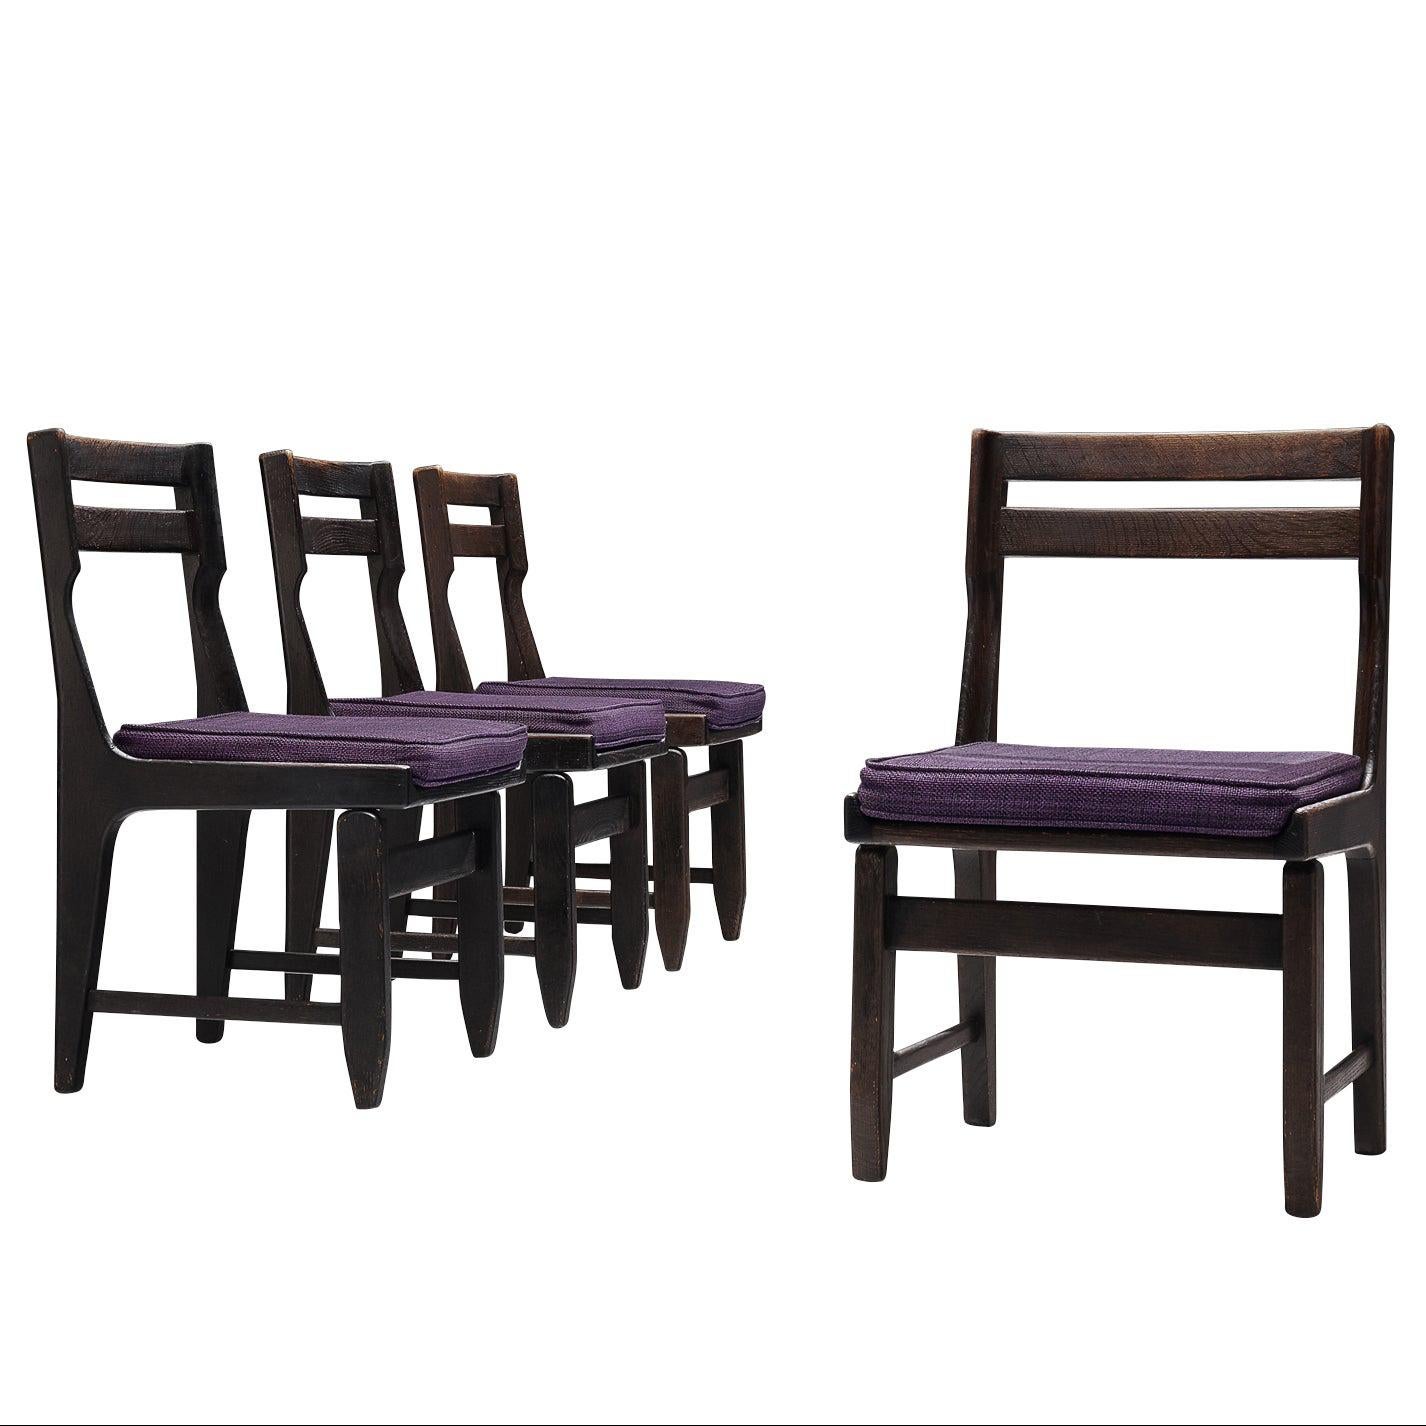 Guillerme & Chambron Set of Four Dining Chairs in Darkened Oak